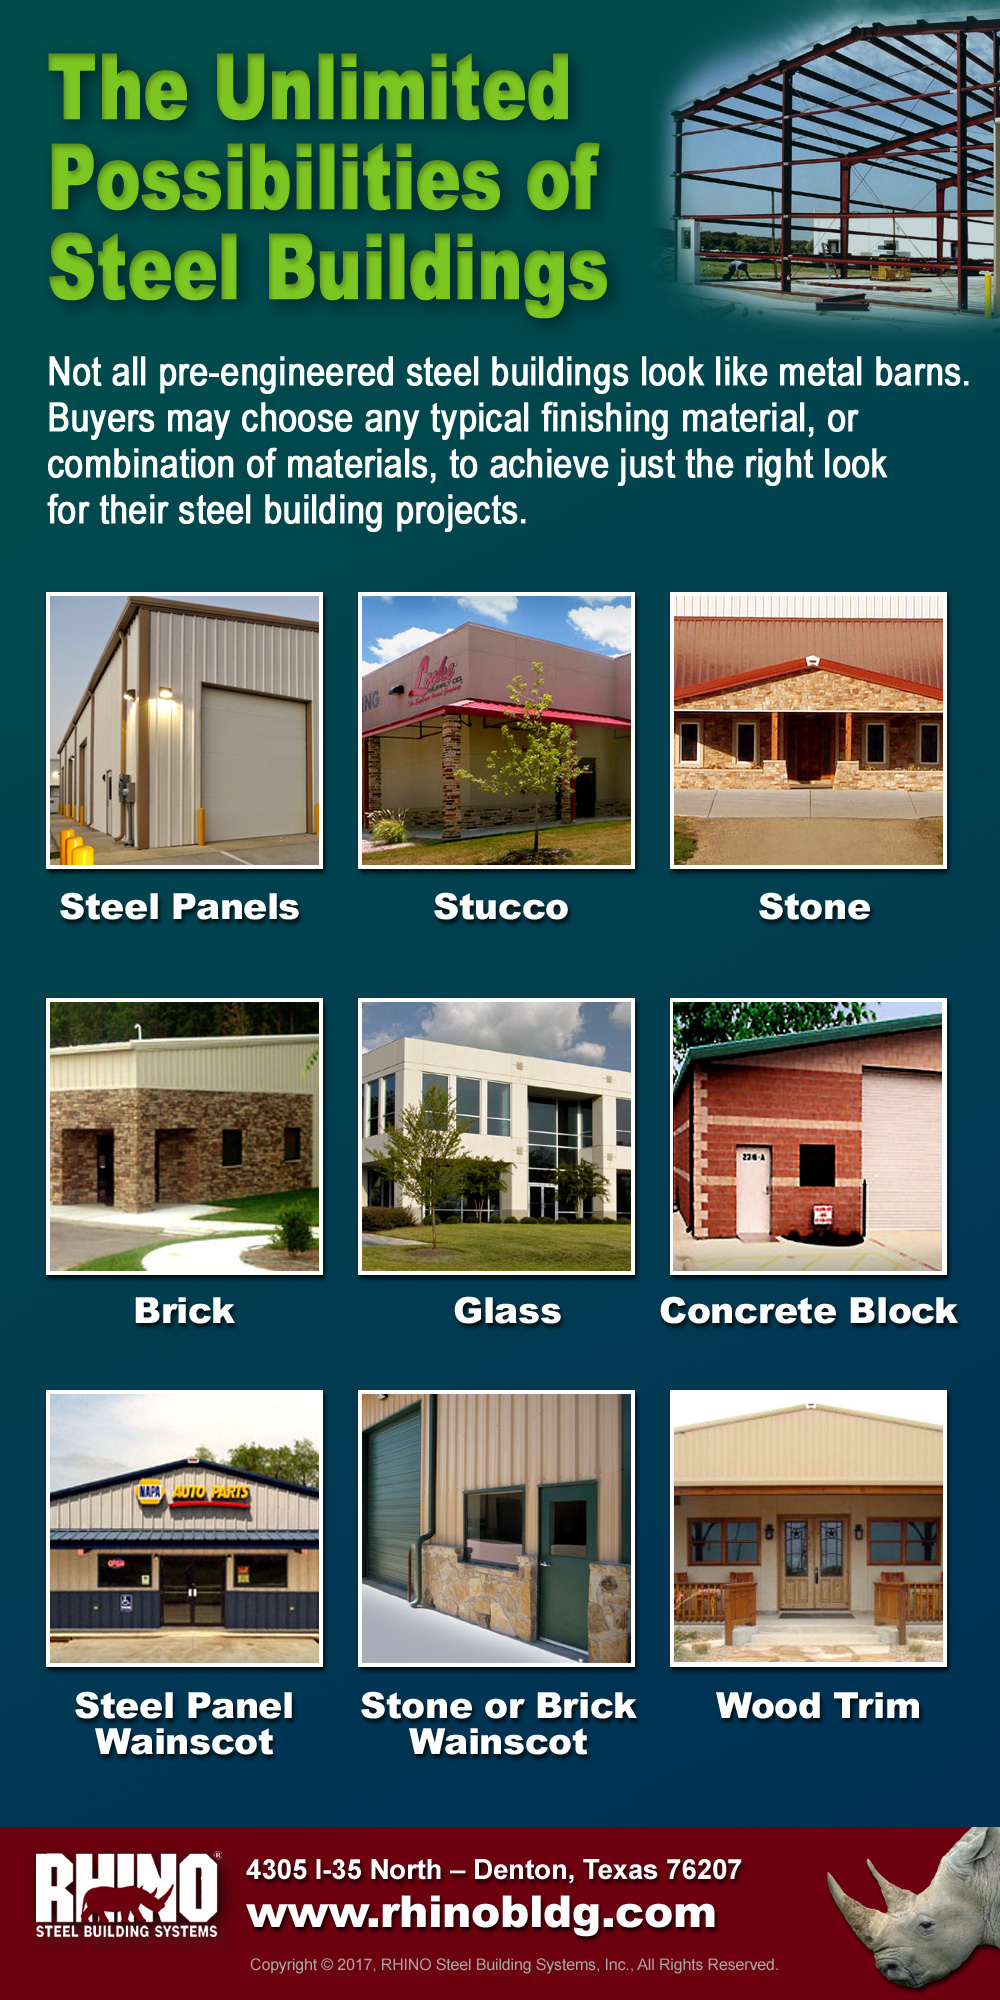 RHINO infographic displaying some of the exterior treatment options possible with a RHINO steel building kit.